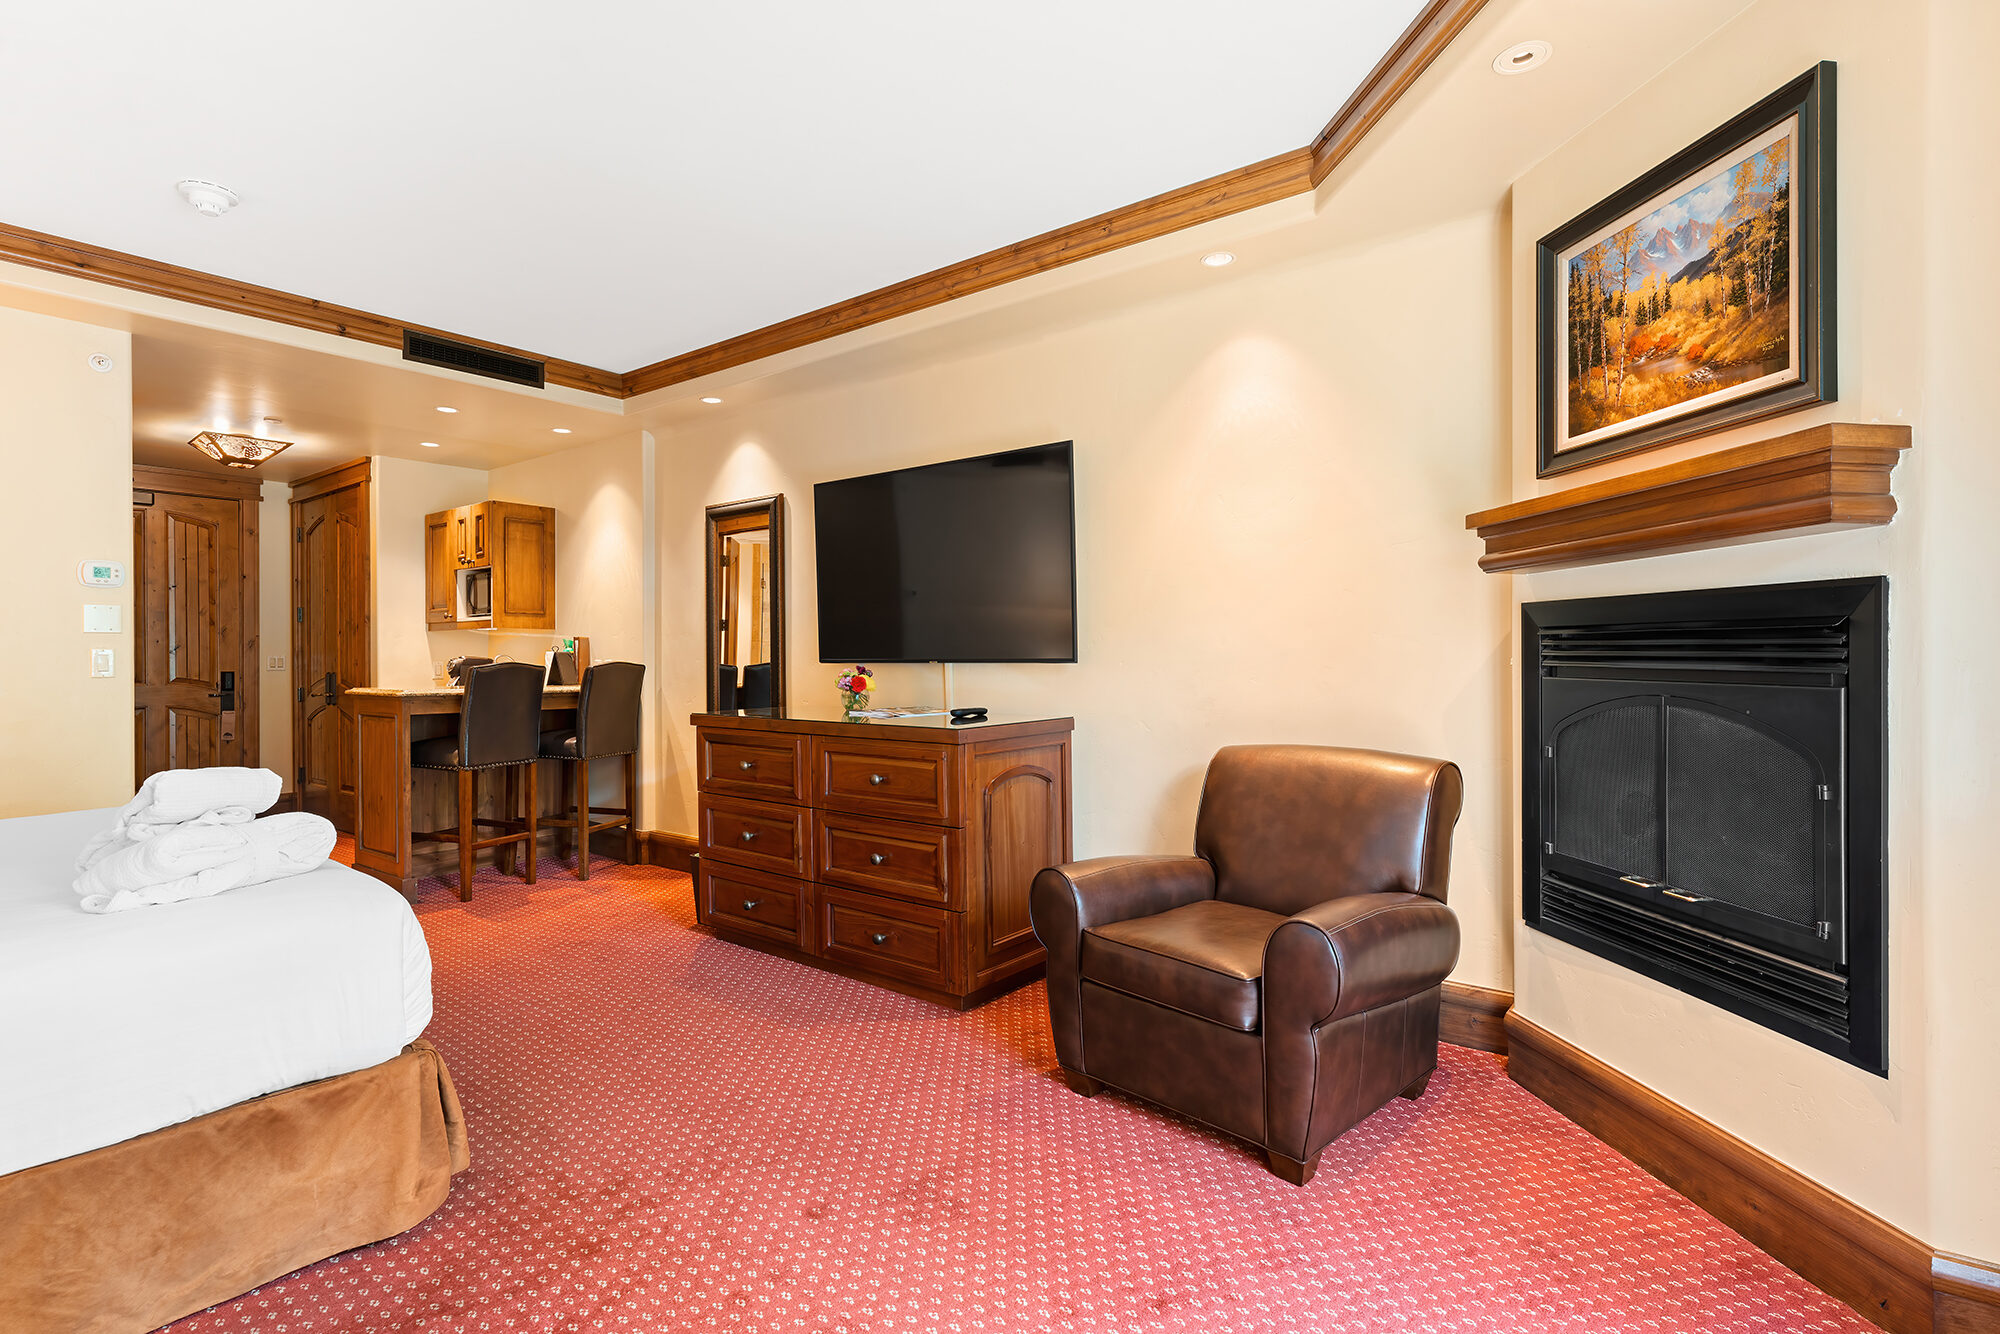 mountain view room with fireplace, kitchenette, king bed Tivoli Lodge Vail Colorado